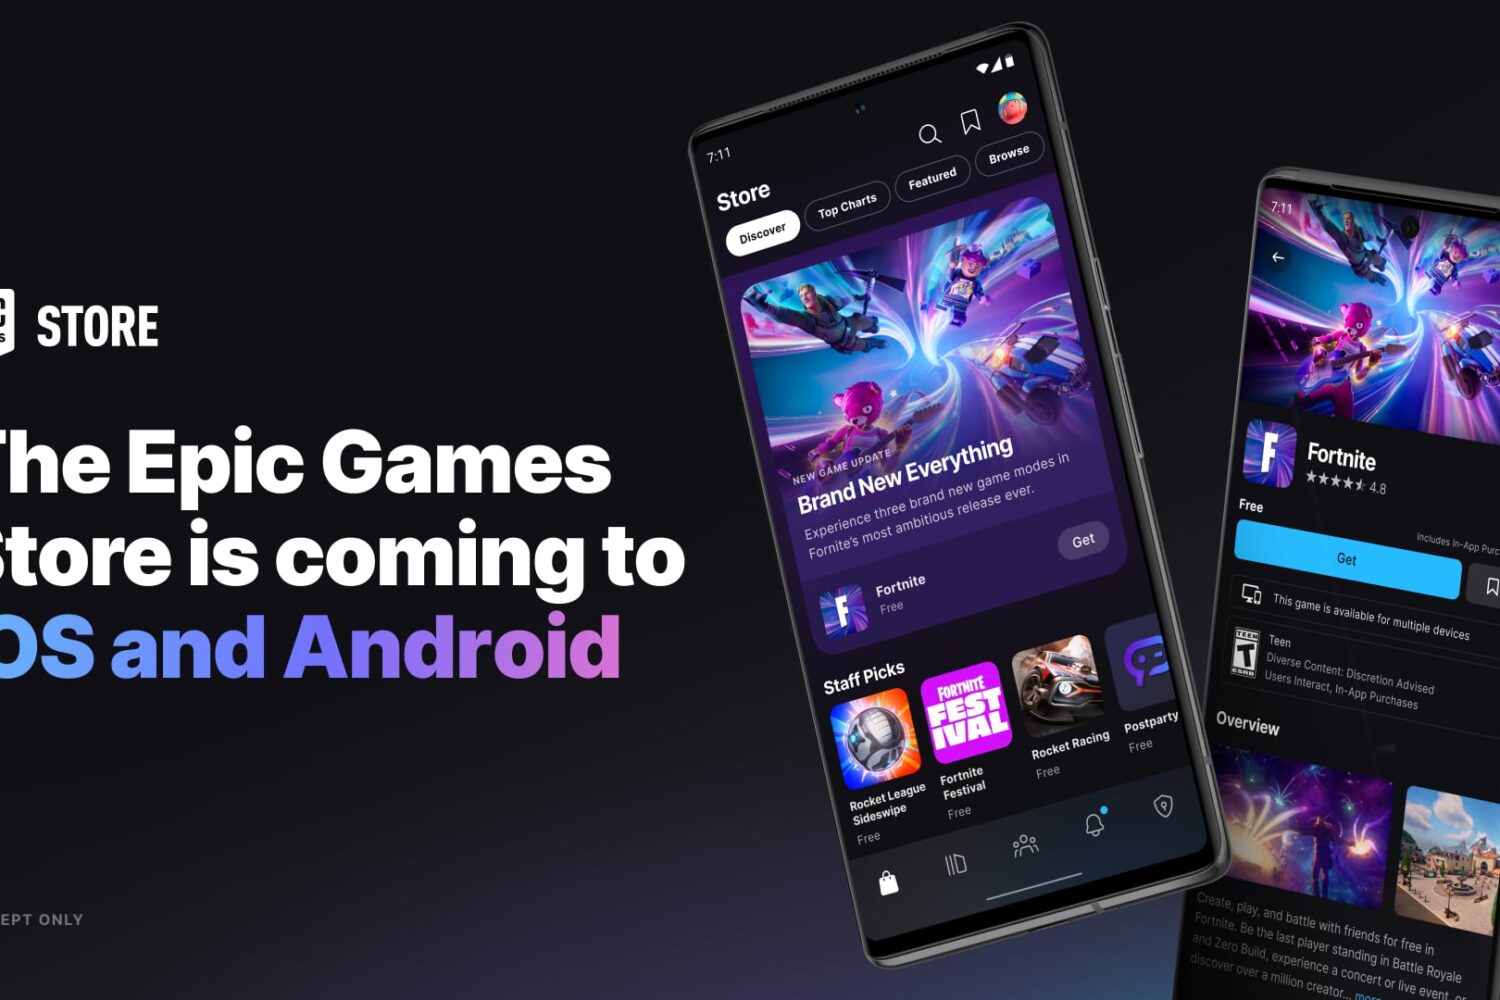 Marketing image promoting Epic Games Store coming to iOS and Android